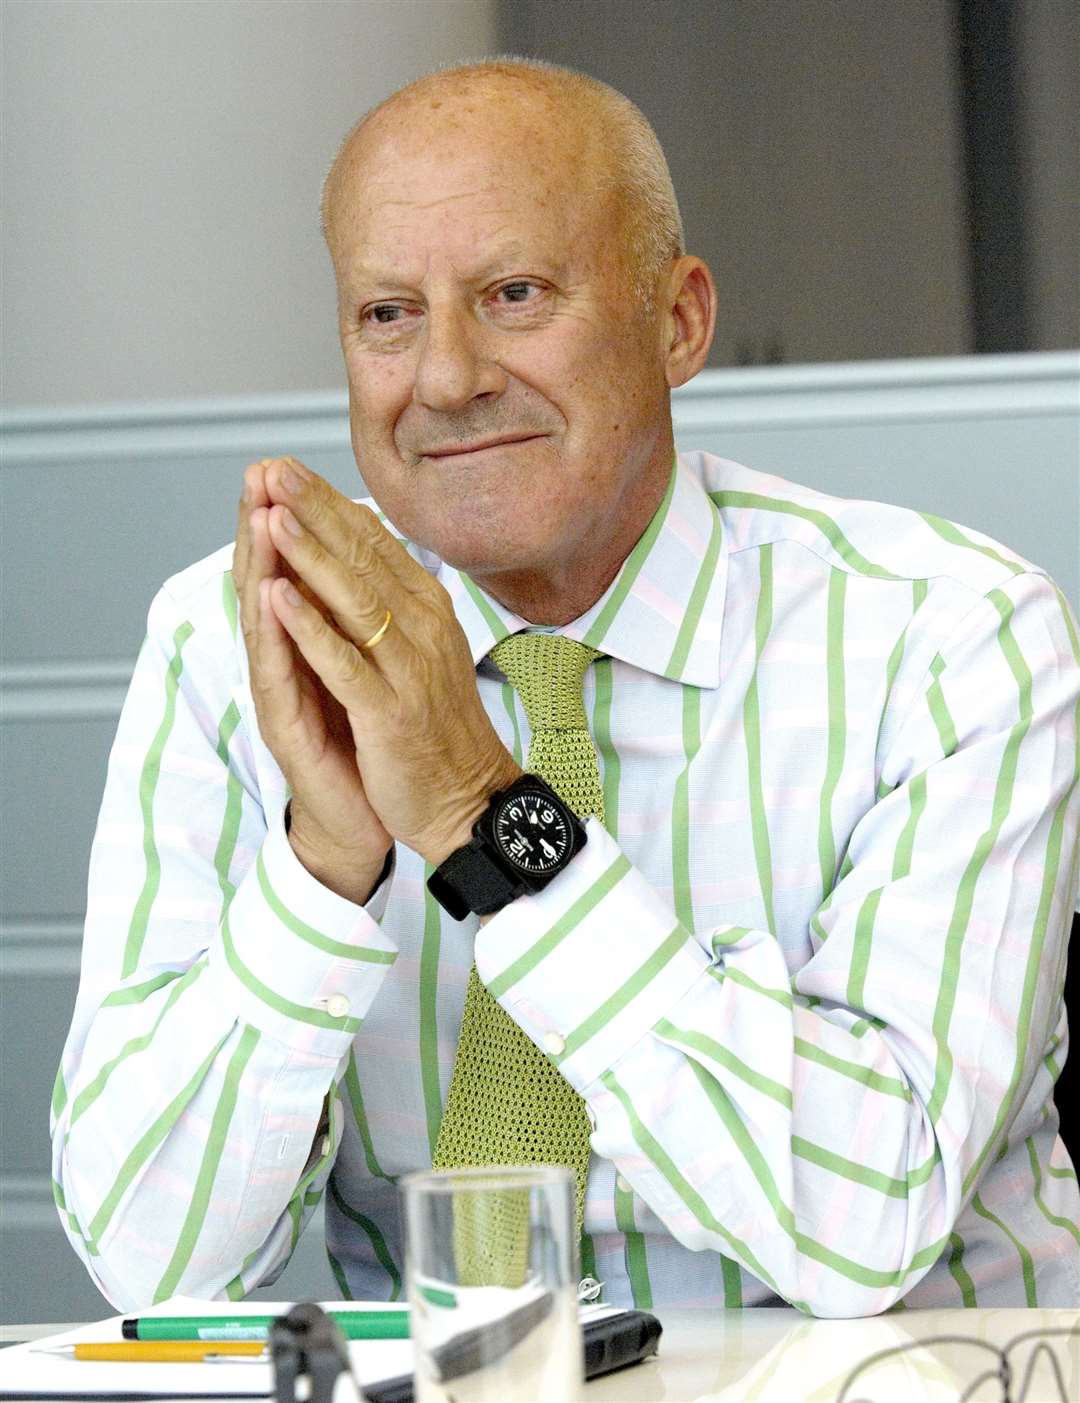 Award winning architect Lord Norman Foster is behind the winery designs. Photo credit: Nigel Young/Foster and Partners